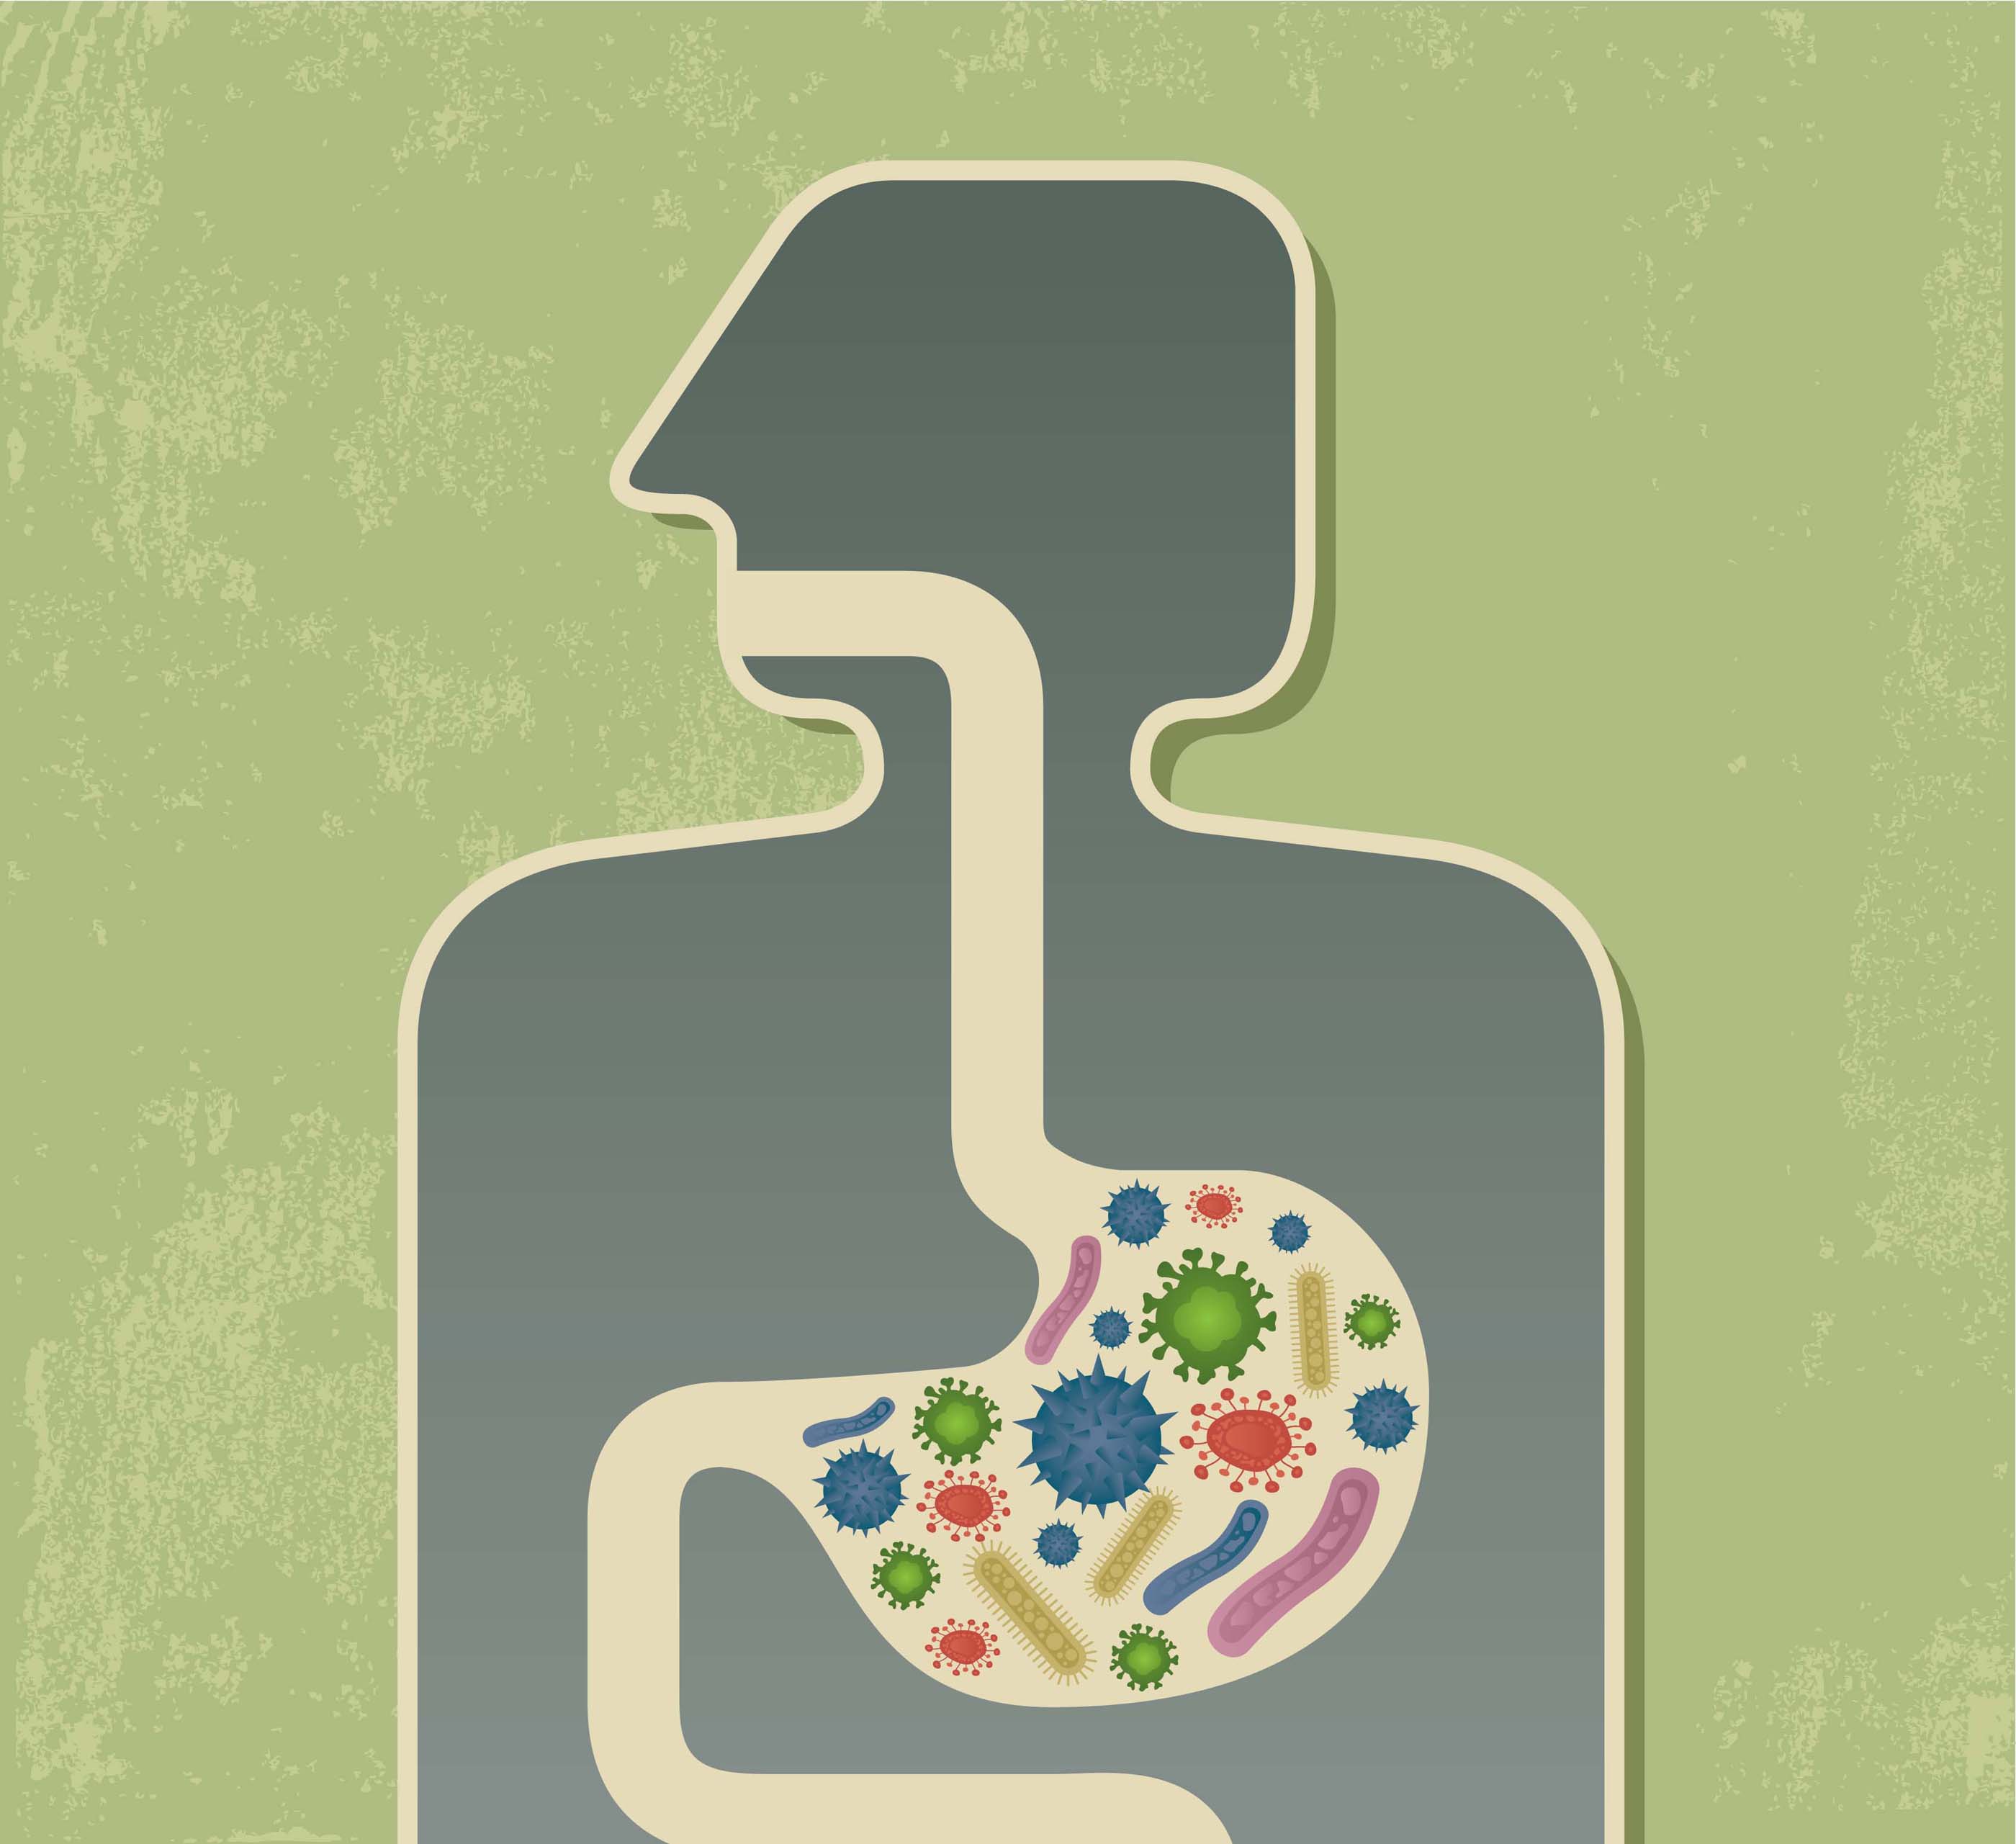 DNA Sequencing Used to Study Changes in Gut Microbiome